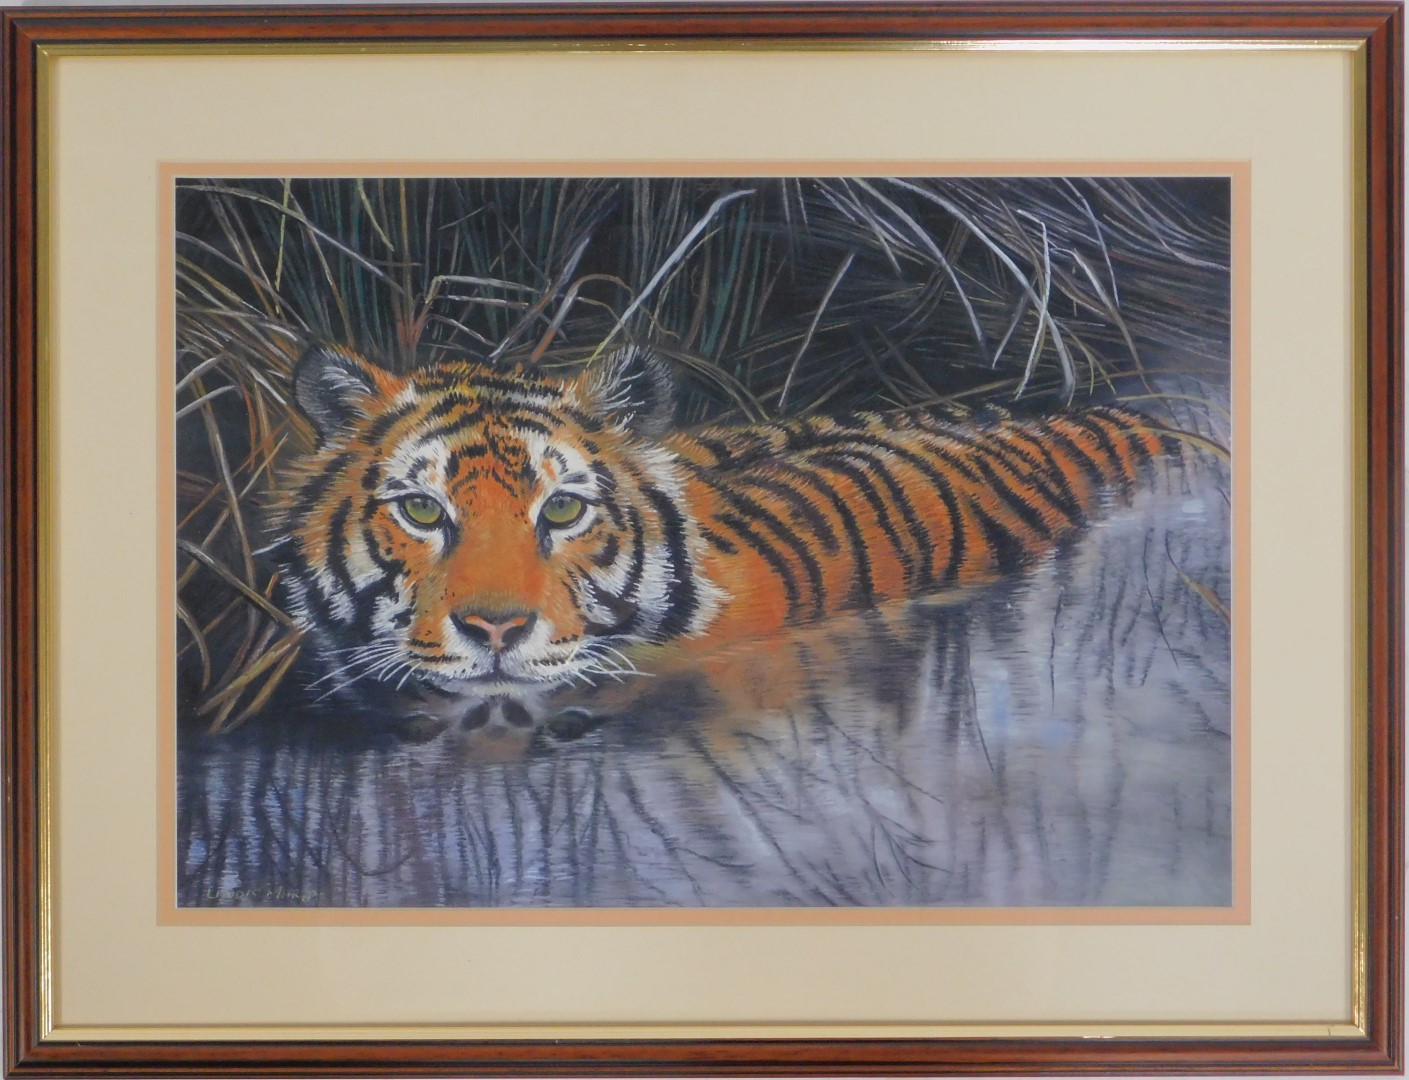 After Lindis Maria Colam (20thC). Siberian tiger in river, giclee print, 28cm x 39cm, framed and gla - Image 2 of 3